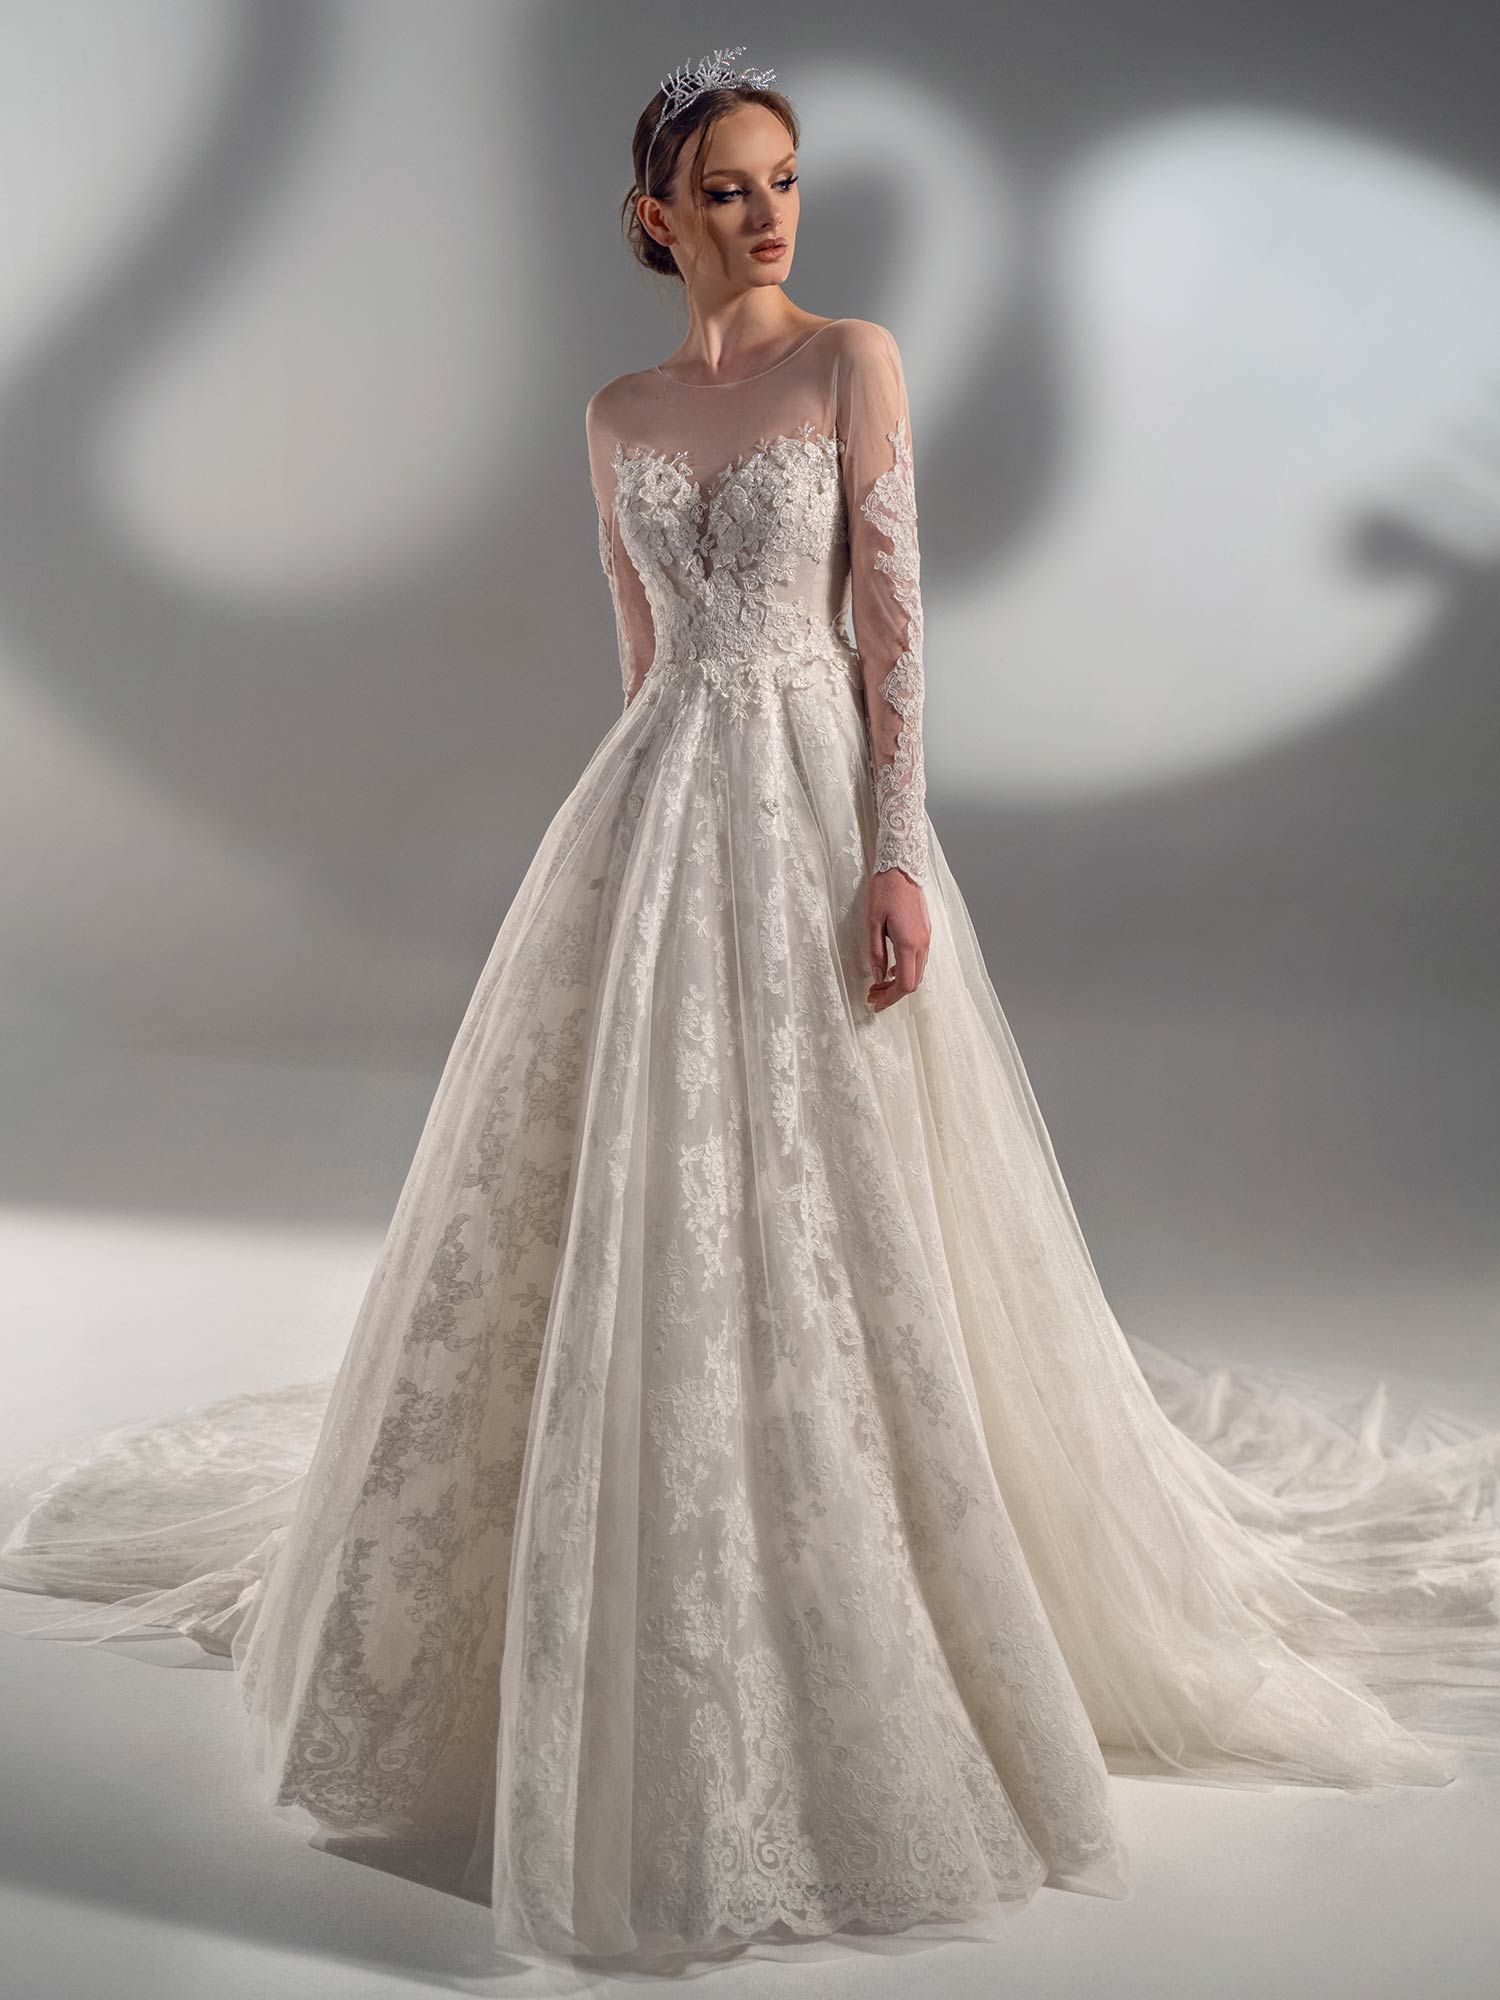 Great Wedding Dresses With Lace And Sleeves of the decade Learn more ...